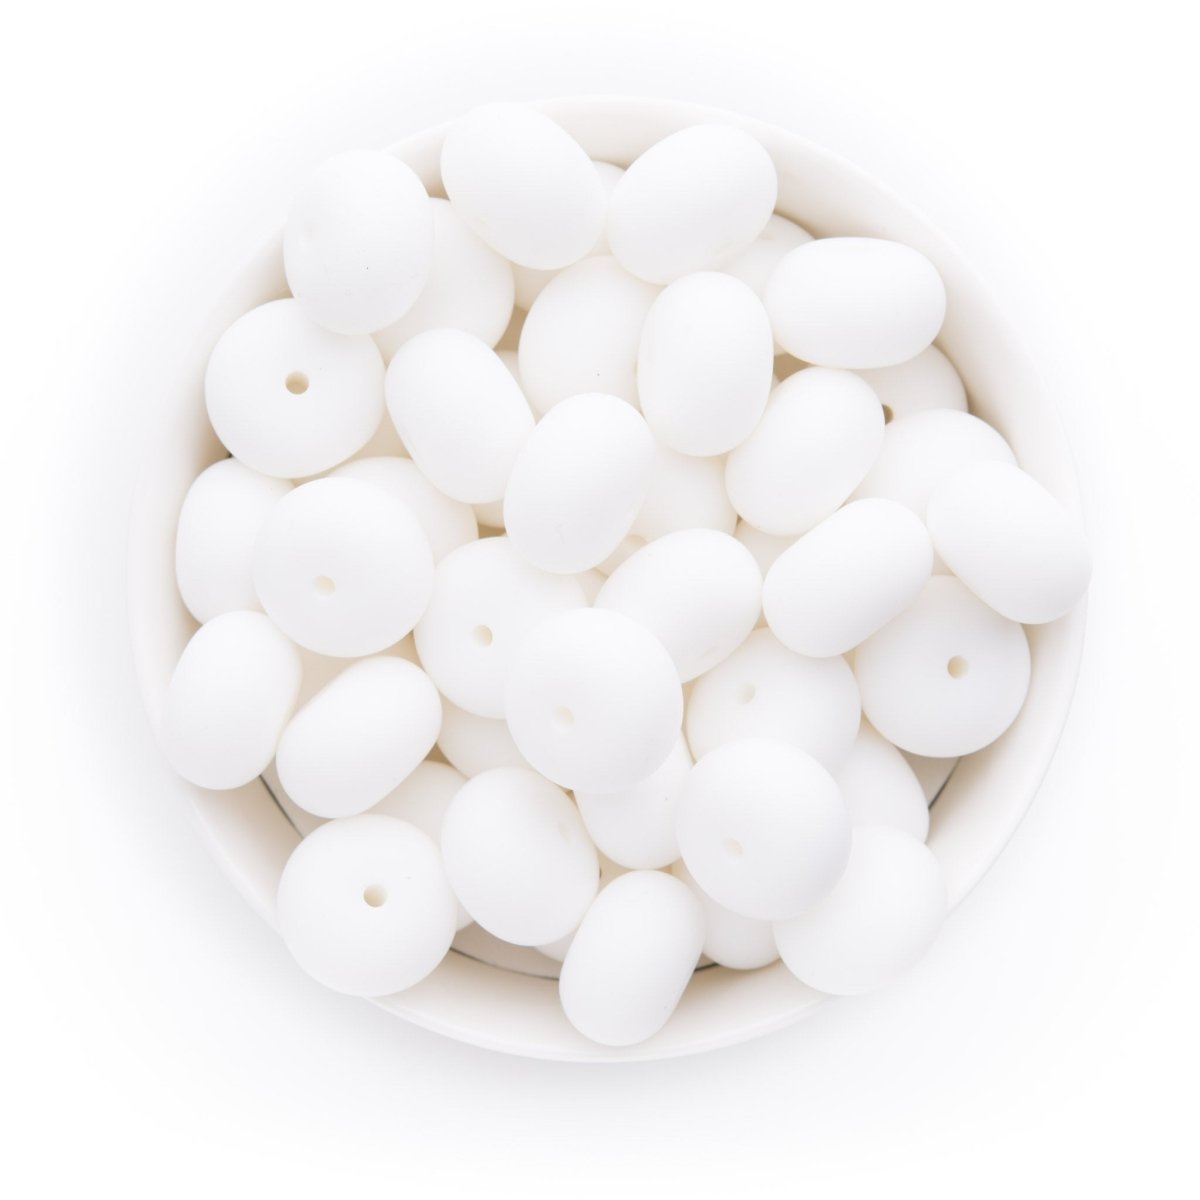 LAST CHANCE Abacus 22mm Packs White from Cara & Co Craft Supply